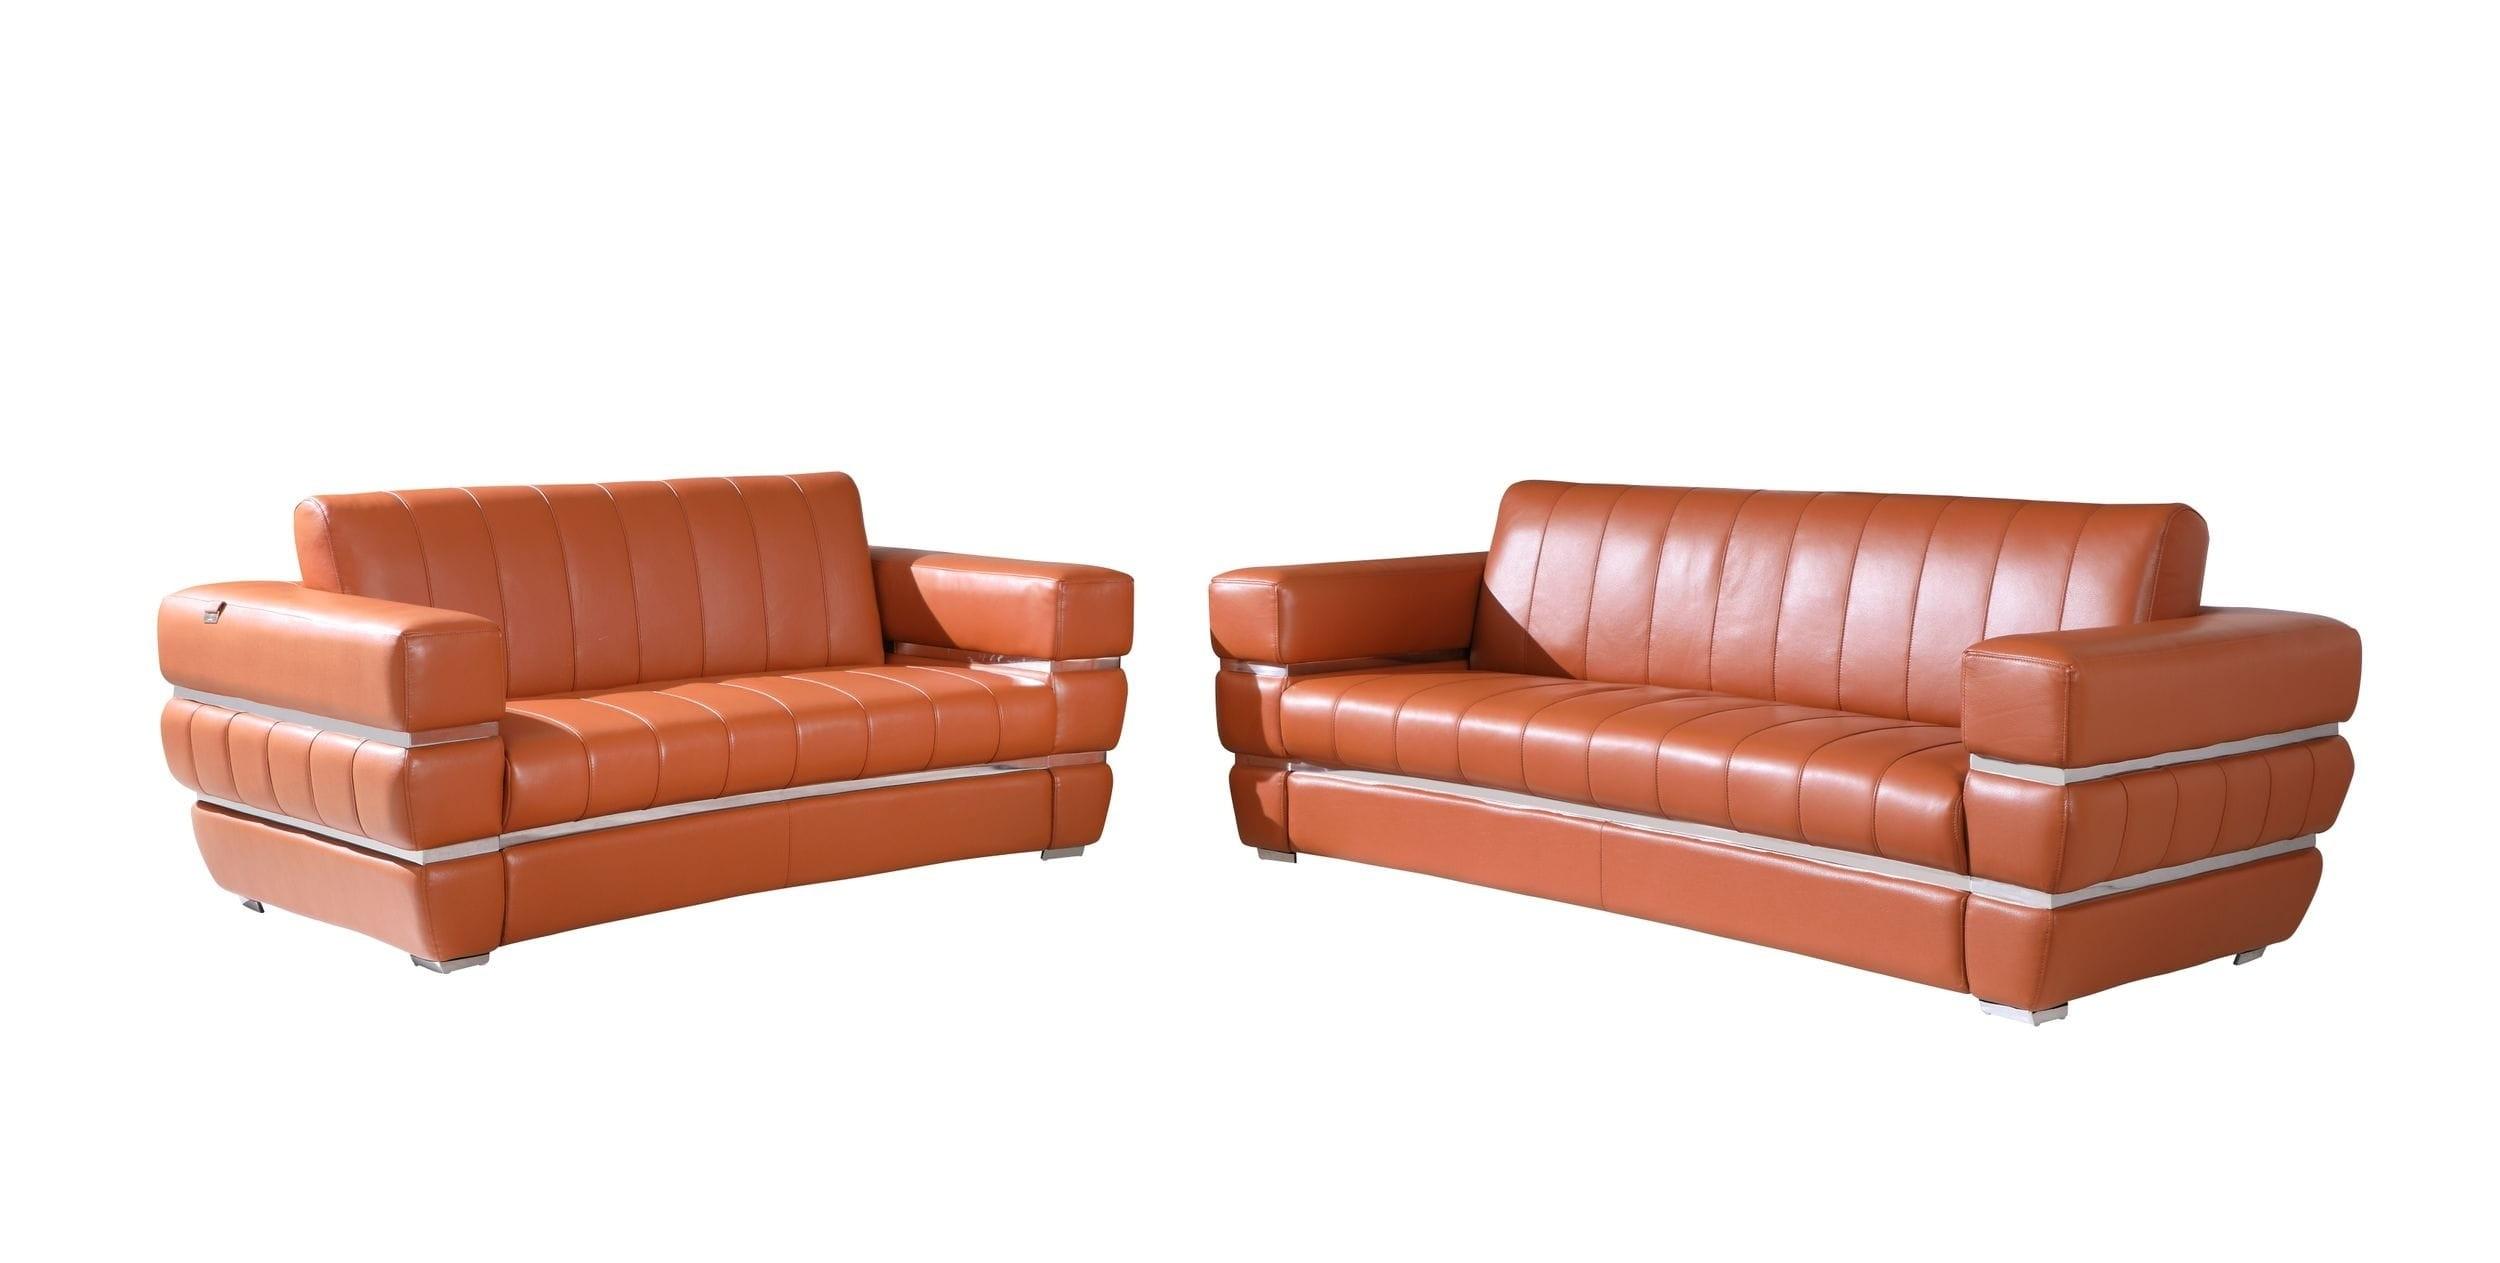 Contemporary Sofa and Loveseat Set 904 904-CAMEL-2PC in Camel Leather